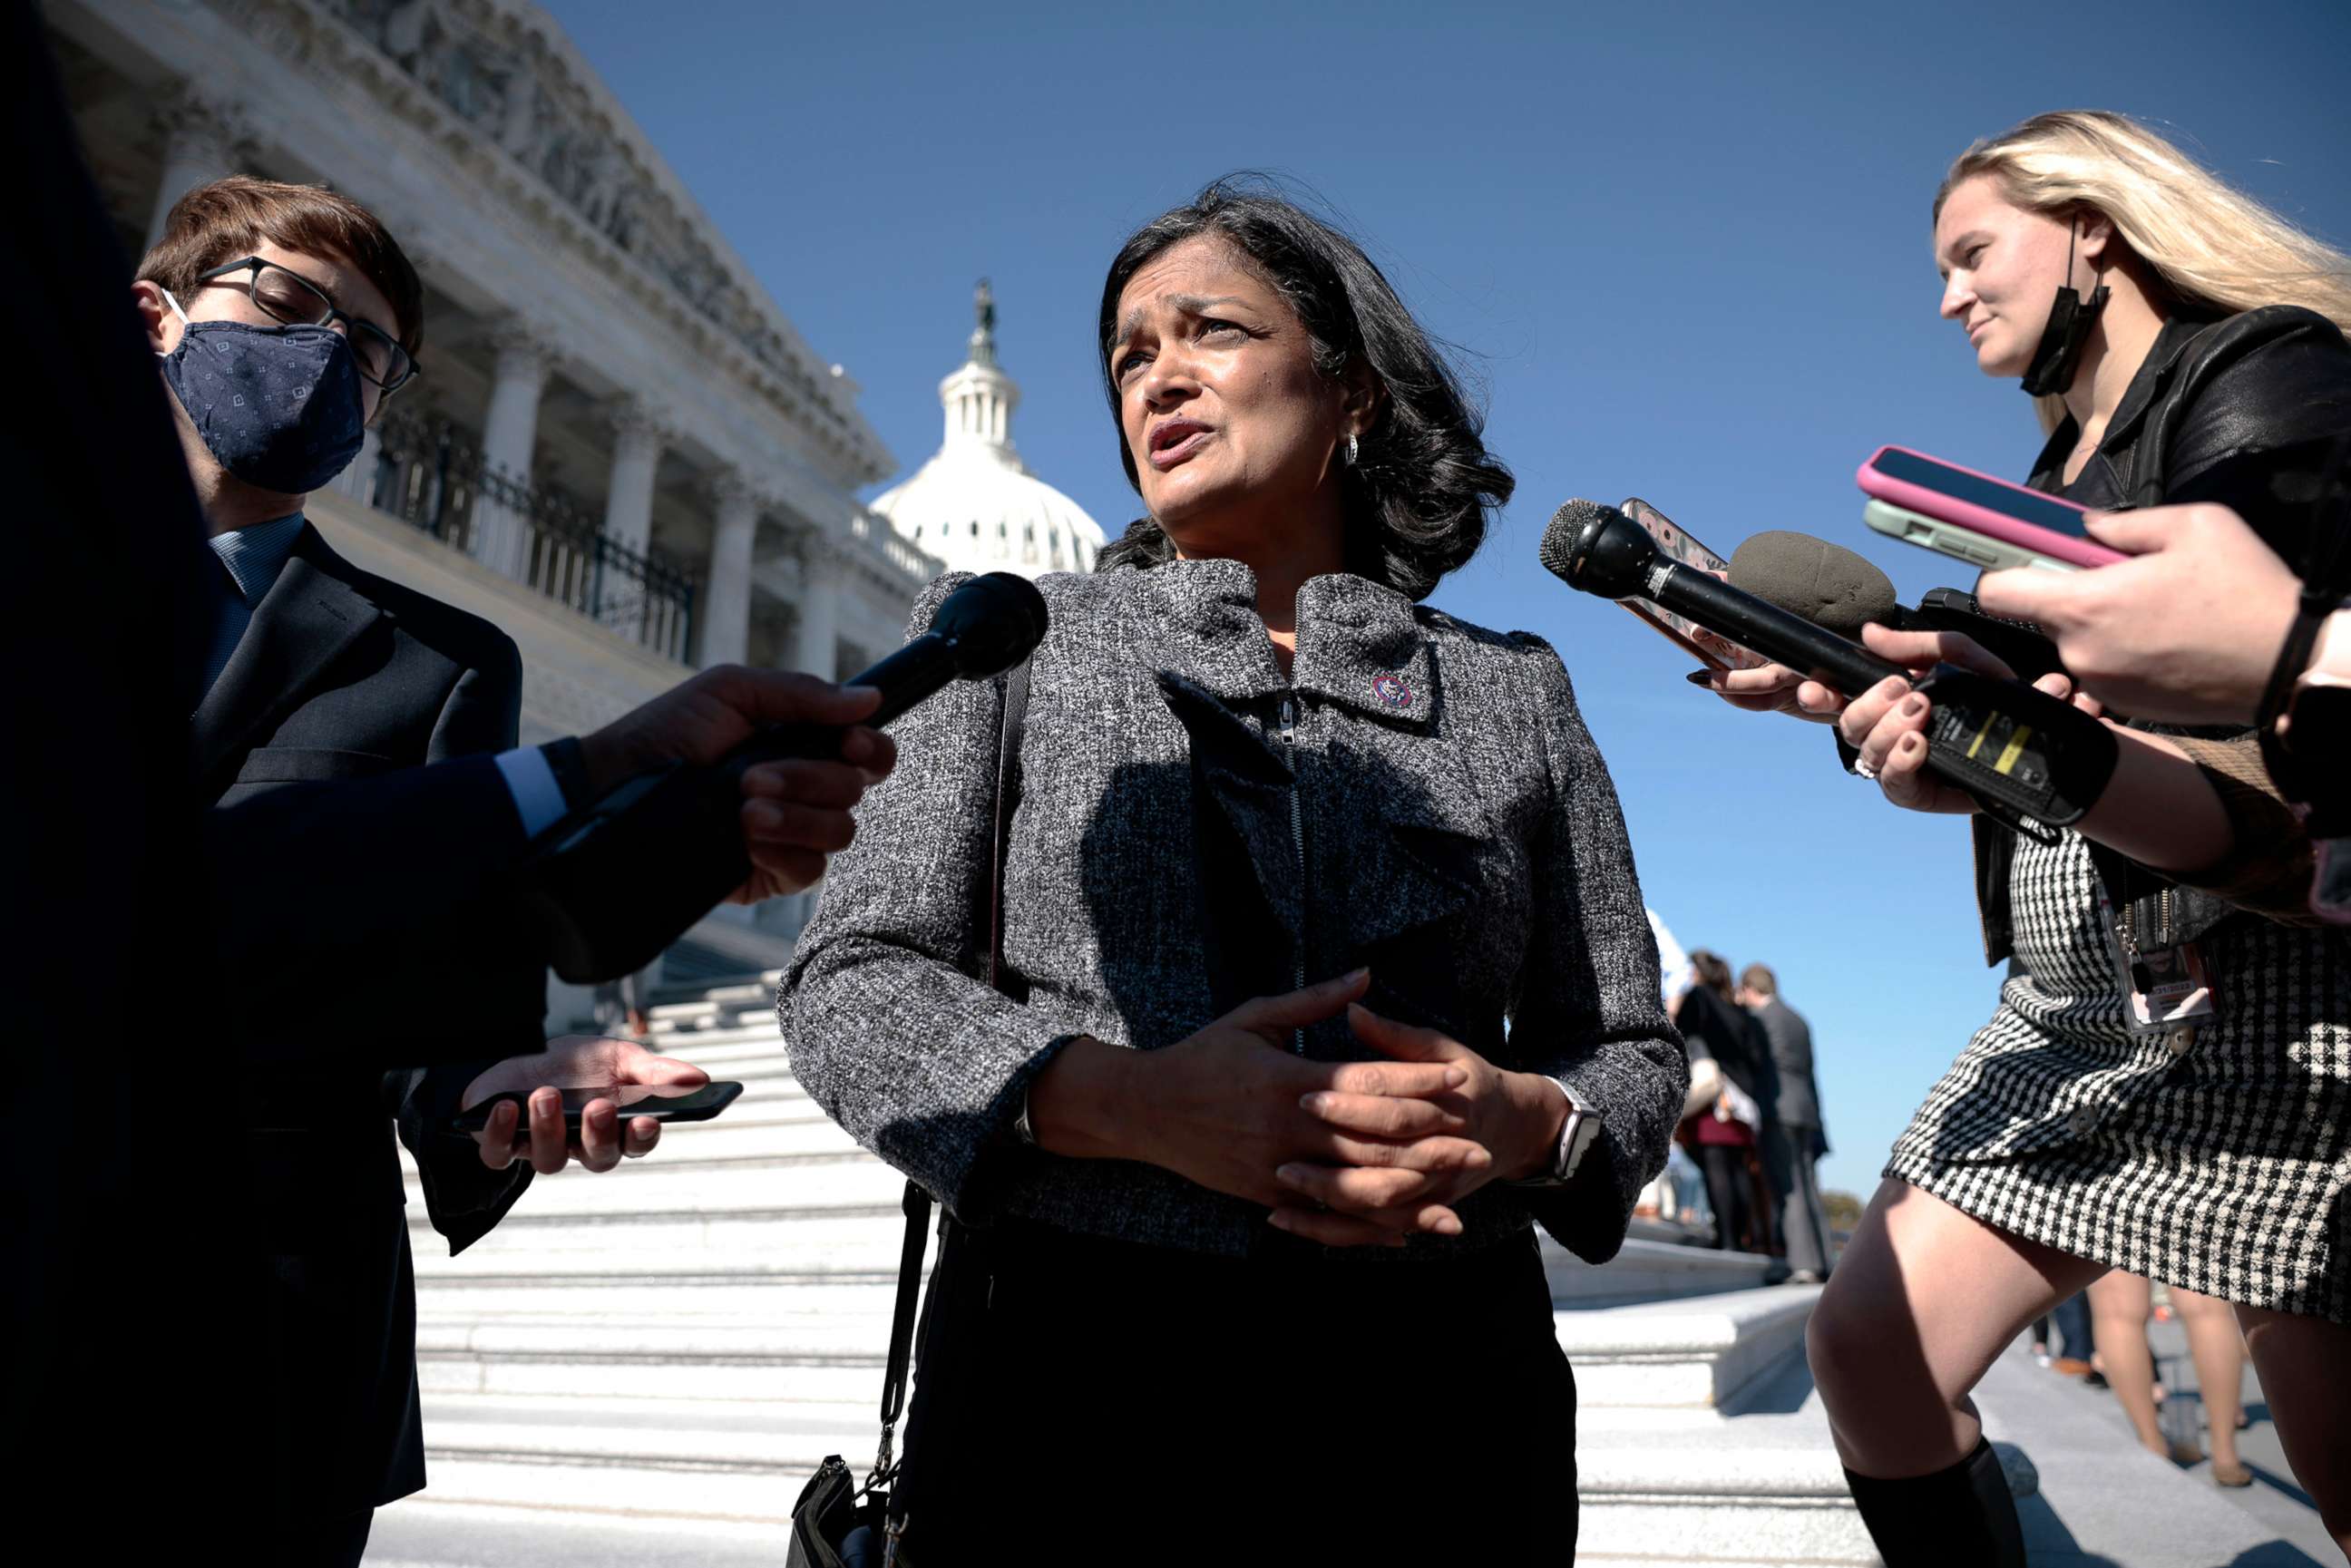 PHOTO: Chair of the Congressional Progressive Caucus Rep. Pramila Jayapal speaks with reporters outside the U.S. Capitol Building, Nov. 18, 2021, in Washington, D.C.